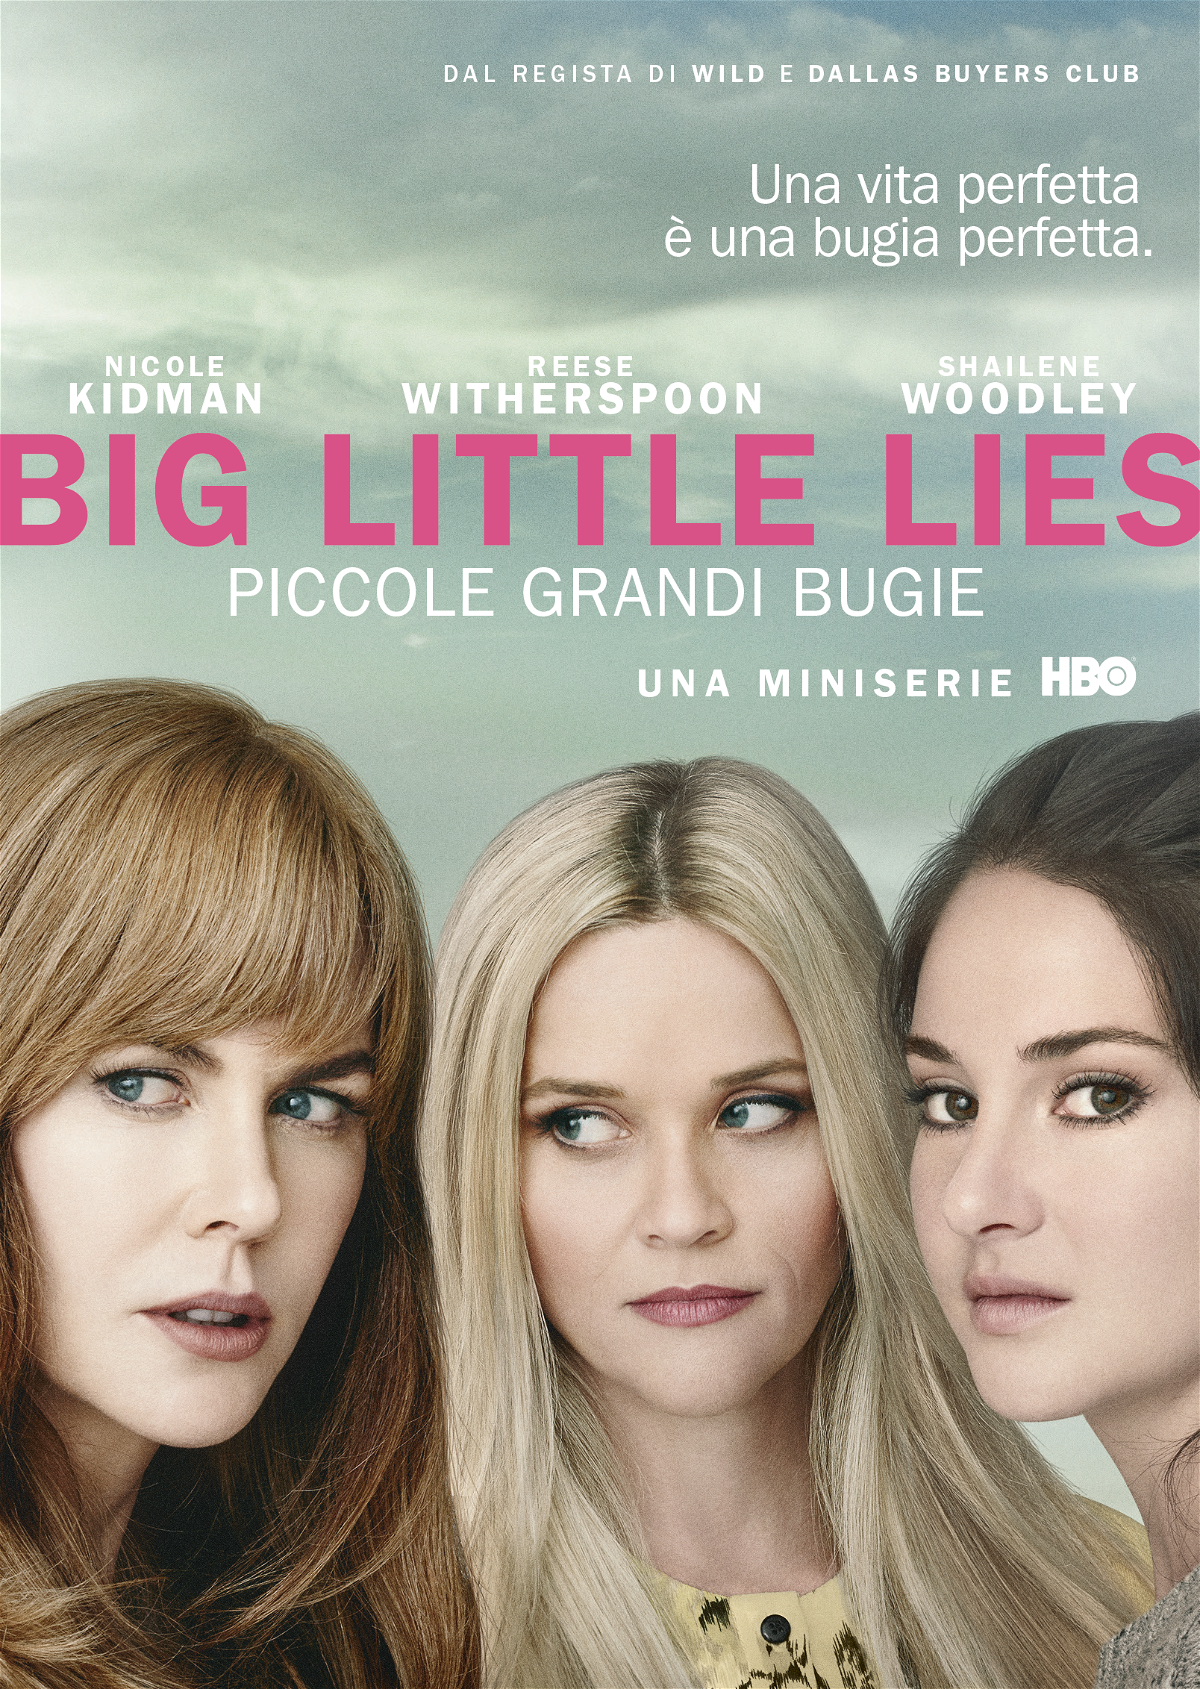 Il poster con Nicole Kidman, Reese Witherspoon e Shailene Woodley 